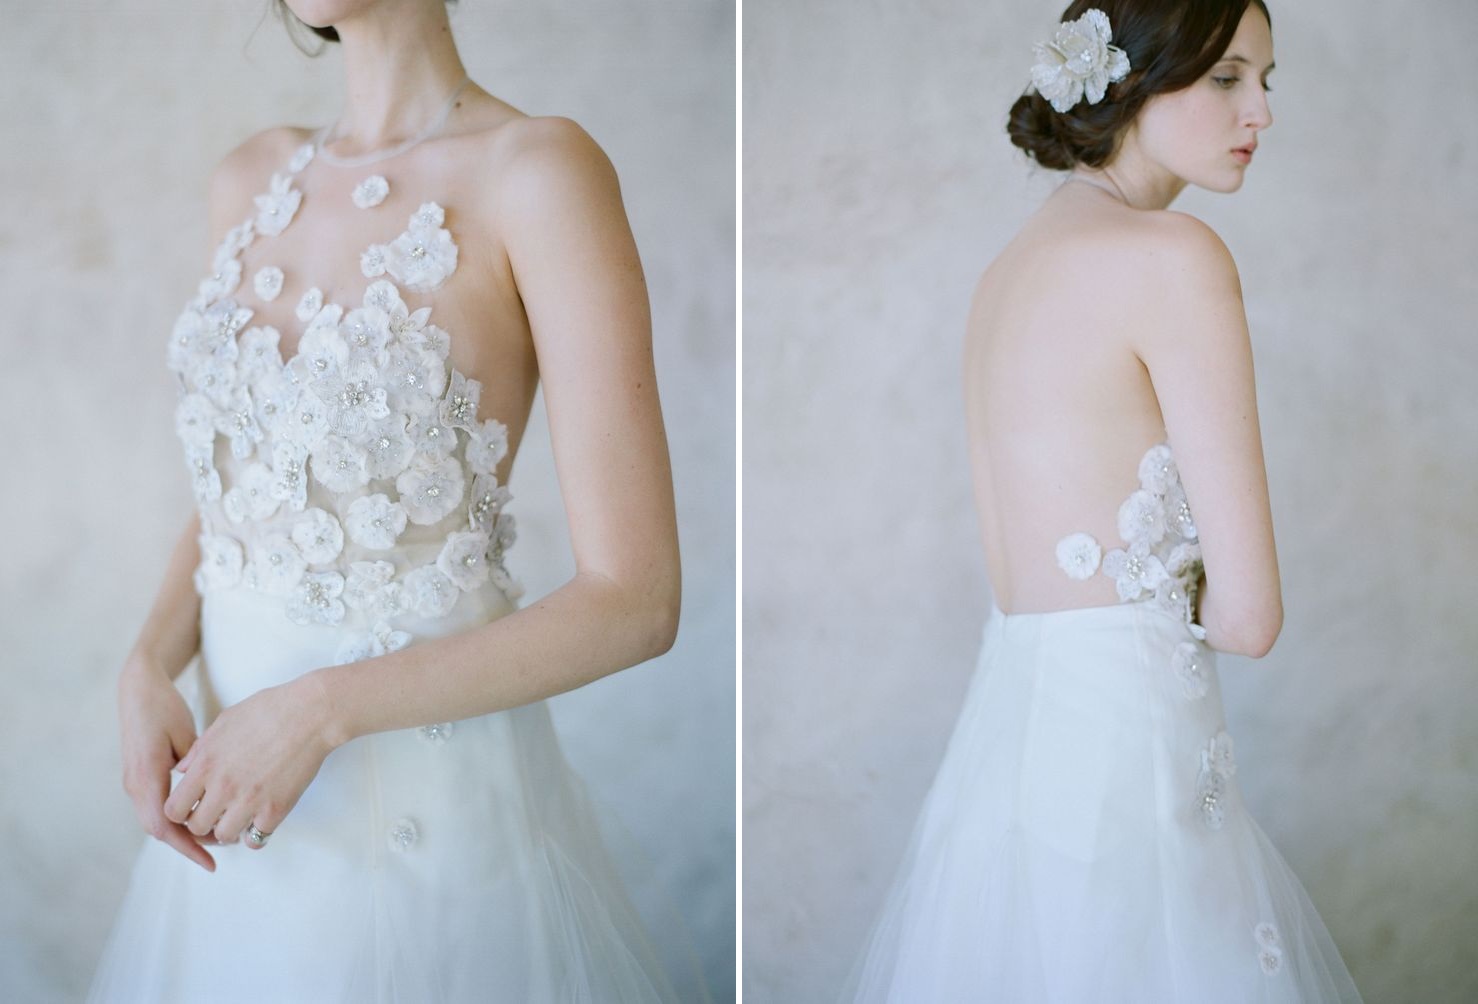 The Beautiful 2015 Wedding Dress Collection from Myra Callan for Twigs & Honey